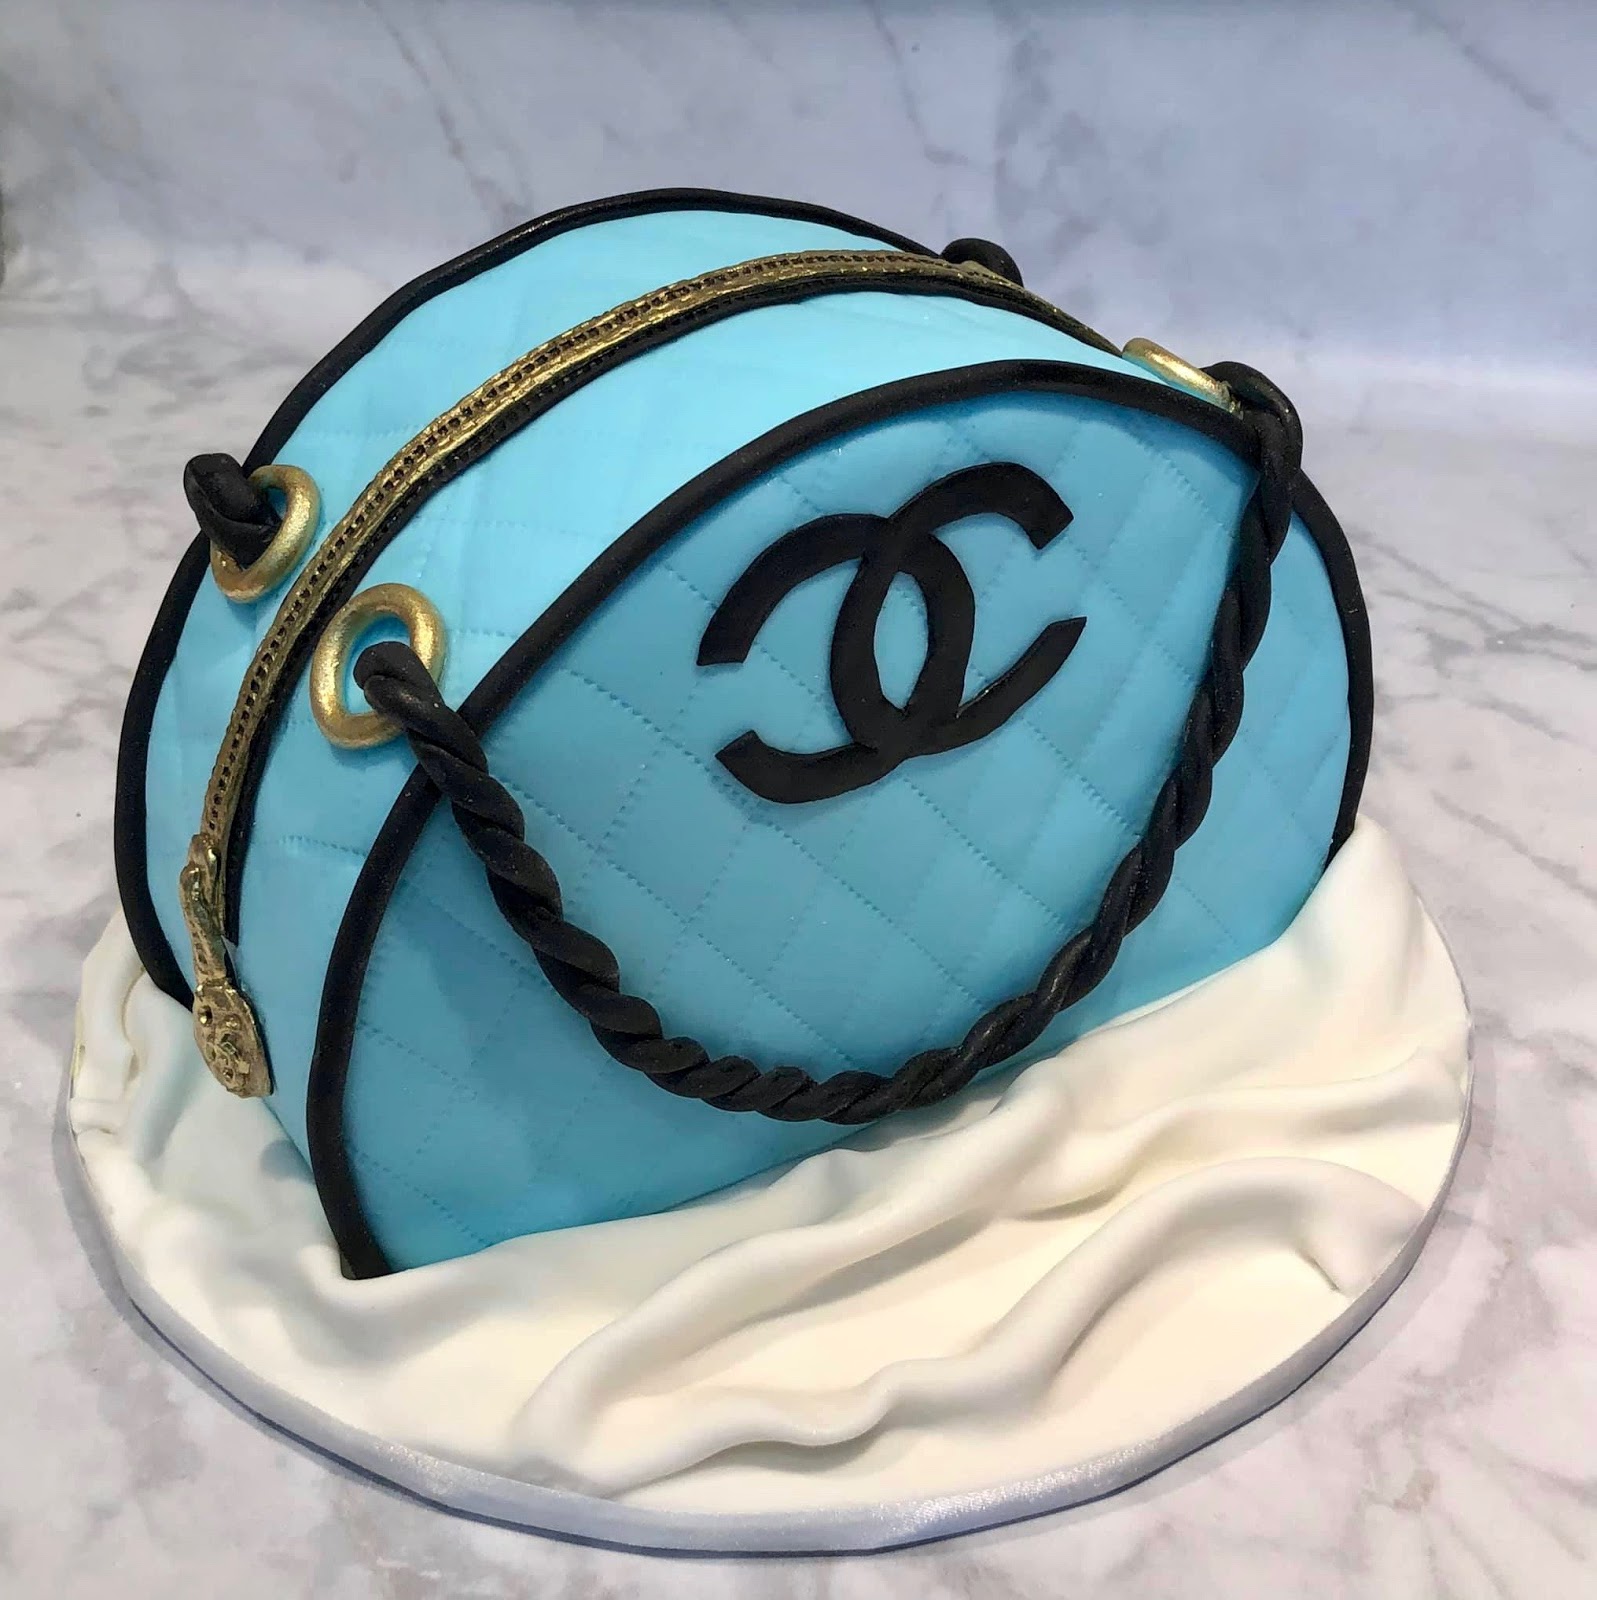 Stuffed Cakes: Juicy Couture Purse Cake